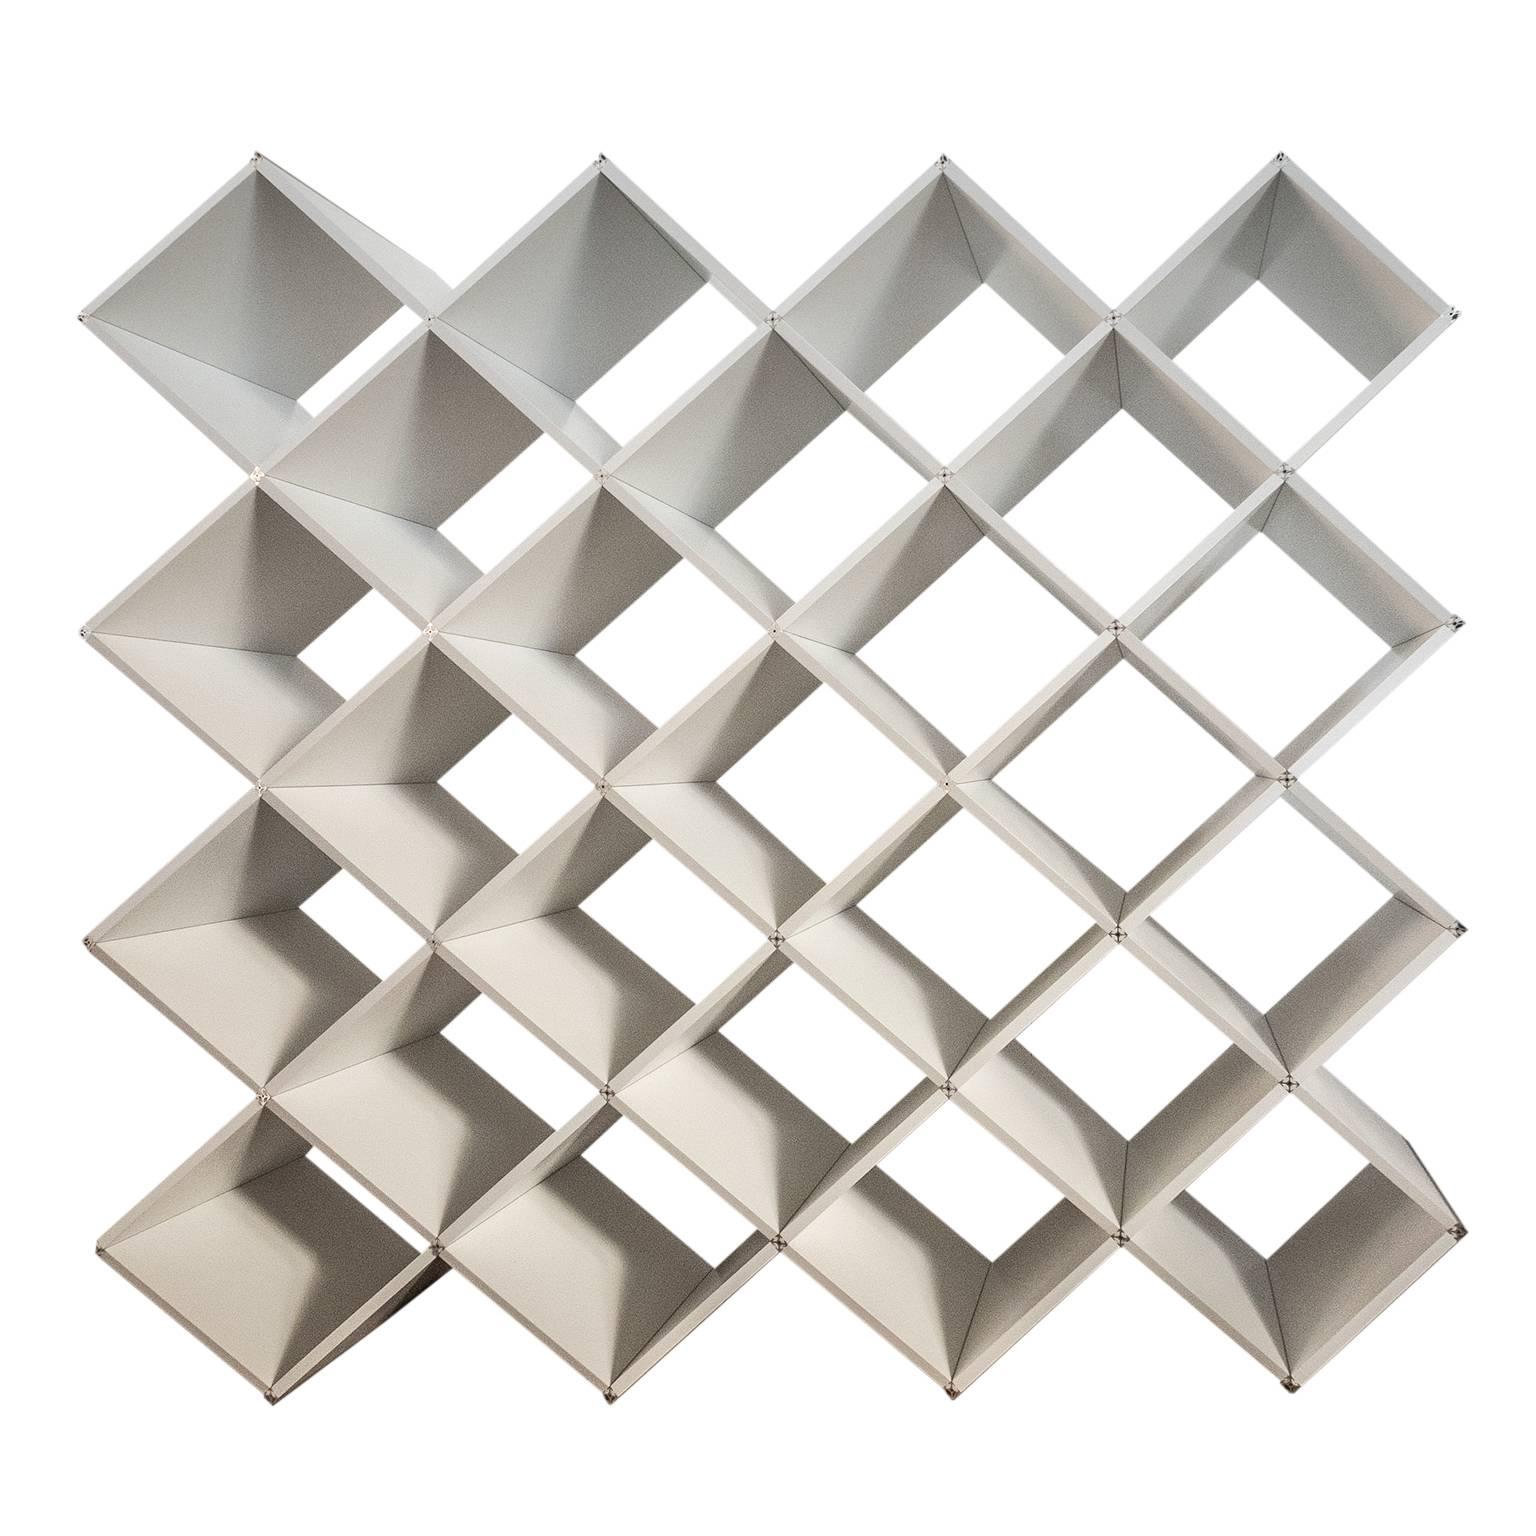 X.me is a modern oblique bookcase, designed by Salvator-John A. Liotta (LAPS Architecture) and manufactured by MYOP, with PVC foam shelves connected by a single extruded aluminum connector.
X.me fits to every types of space, wrapping them. The X is